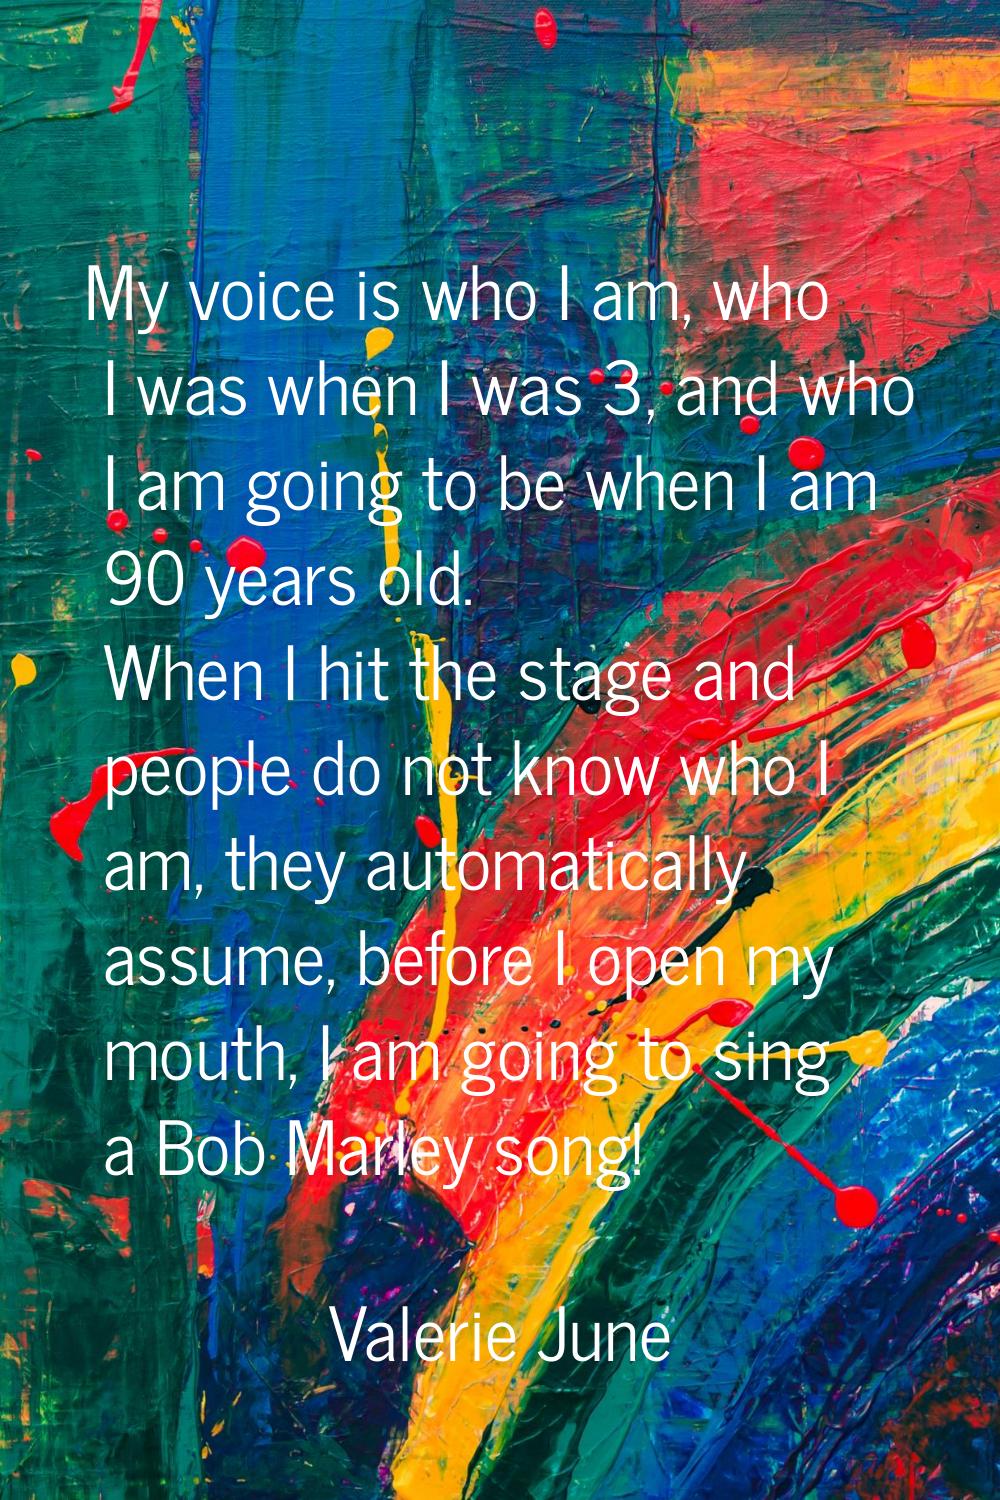 My voice is who I am, who I was when I was 3, and who I am going to be when I am 90 years old. When